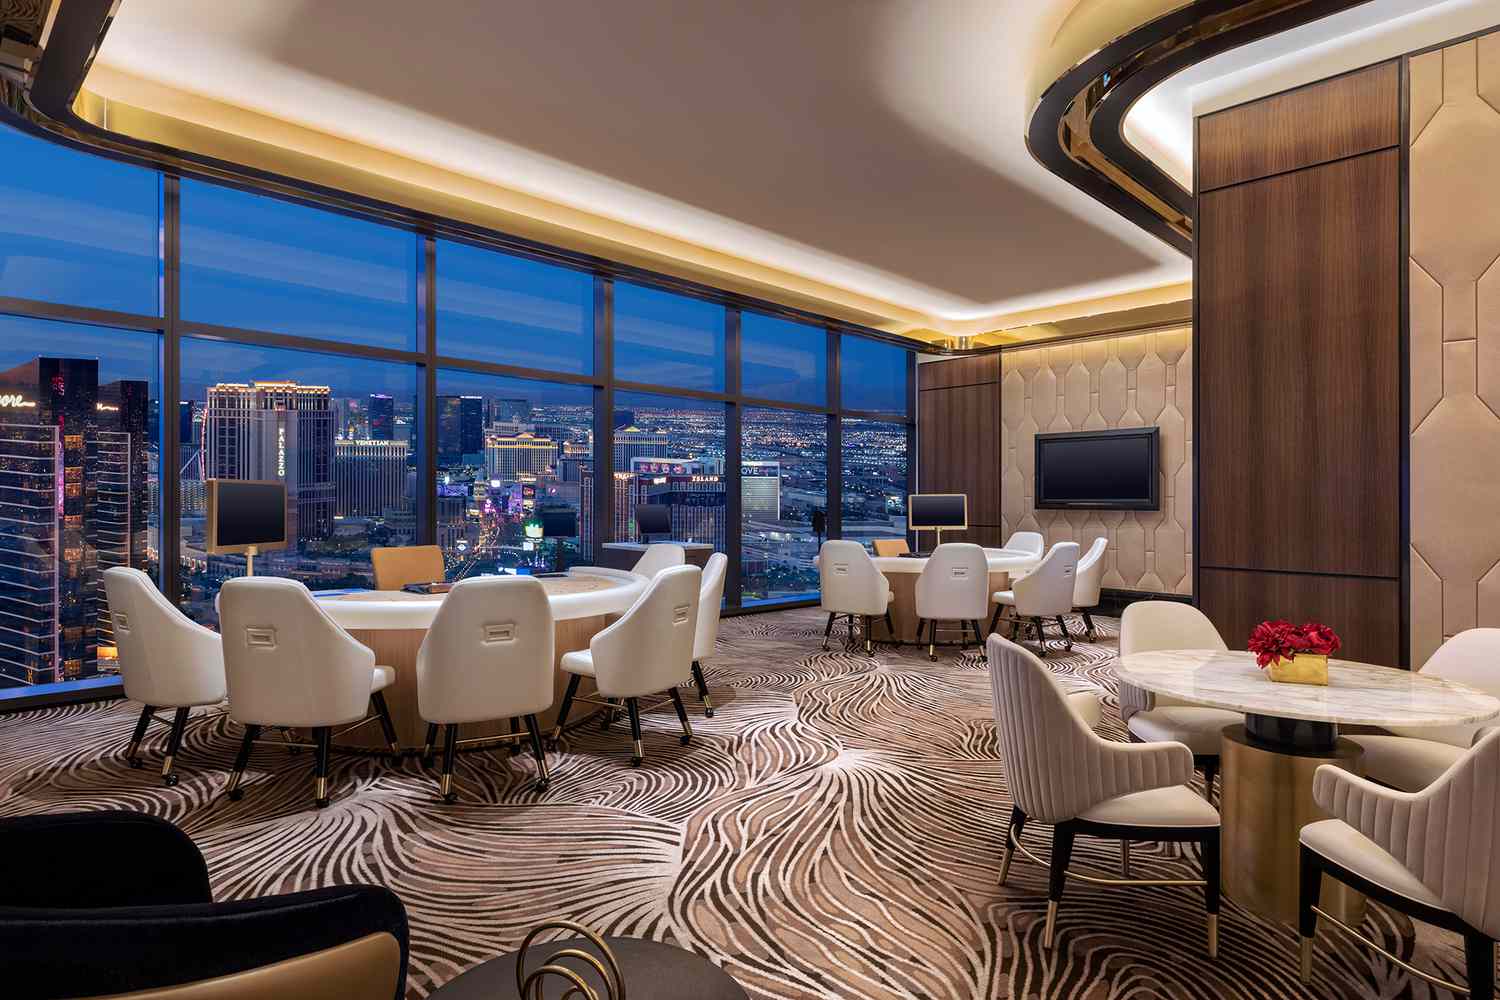 This Iconic Las Vegas Hotel Is Getting One of NYC's Favorite Private Members' Clubs